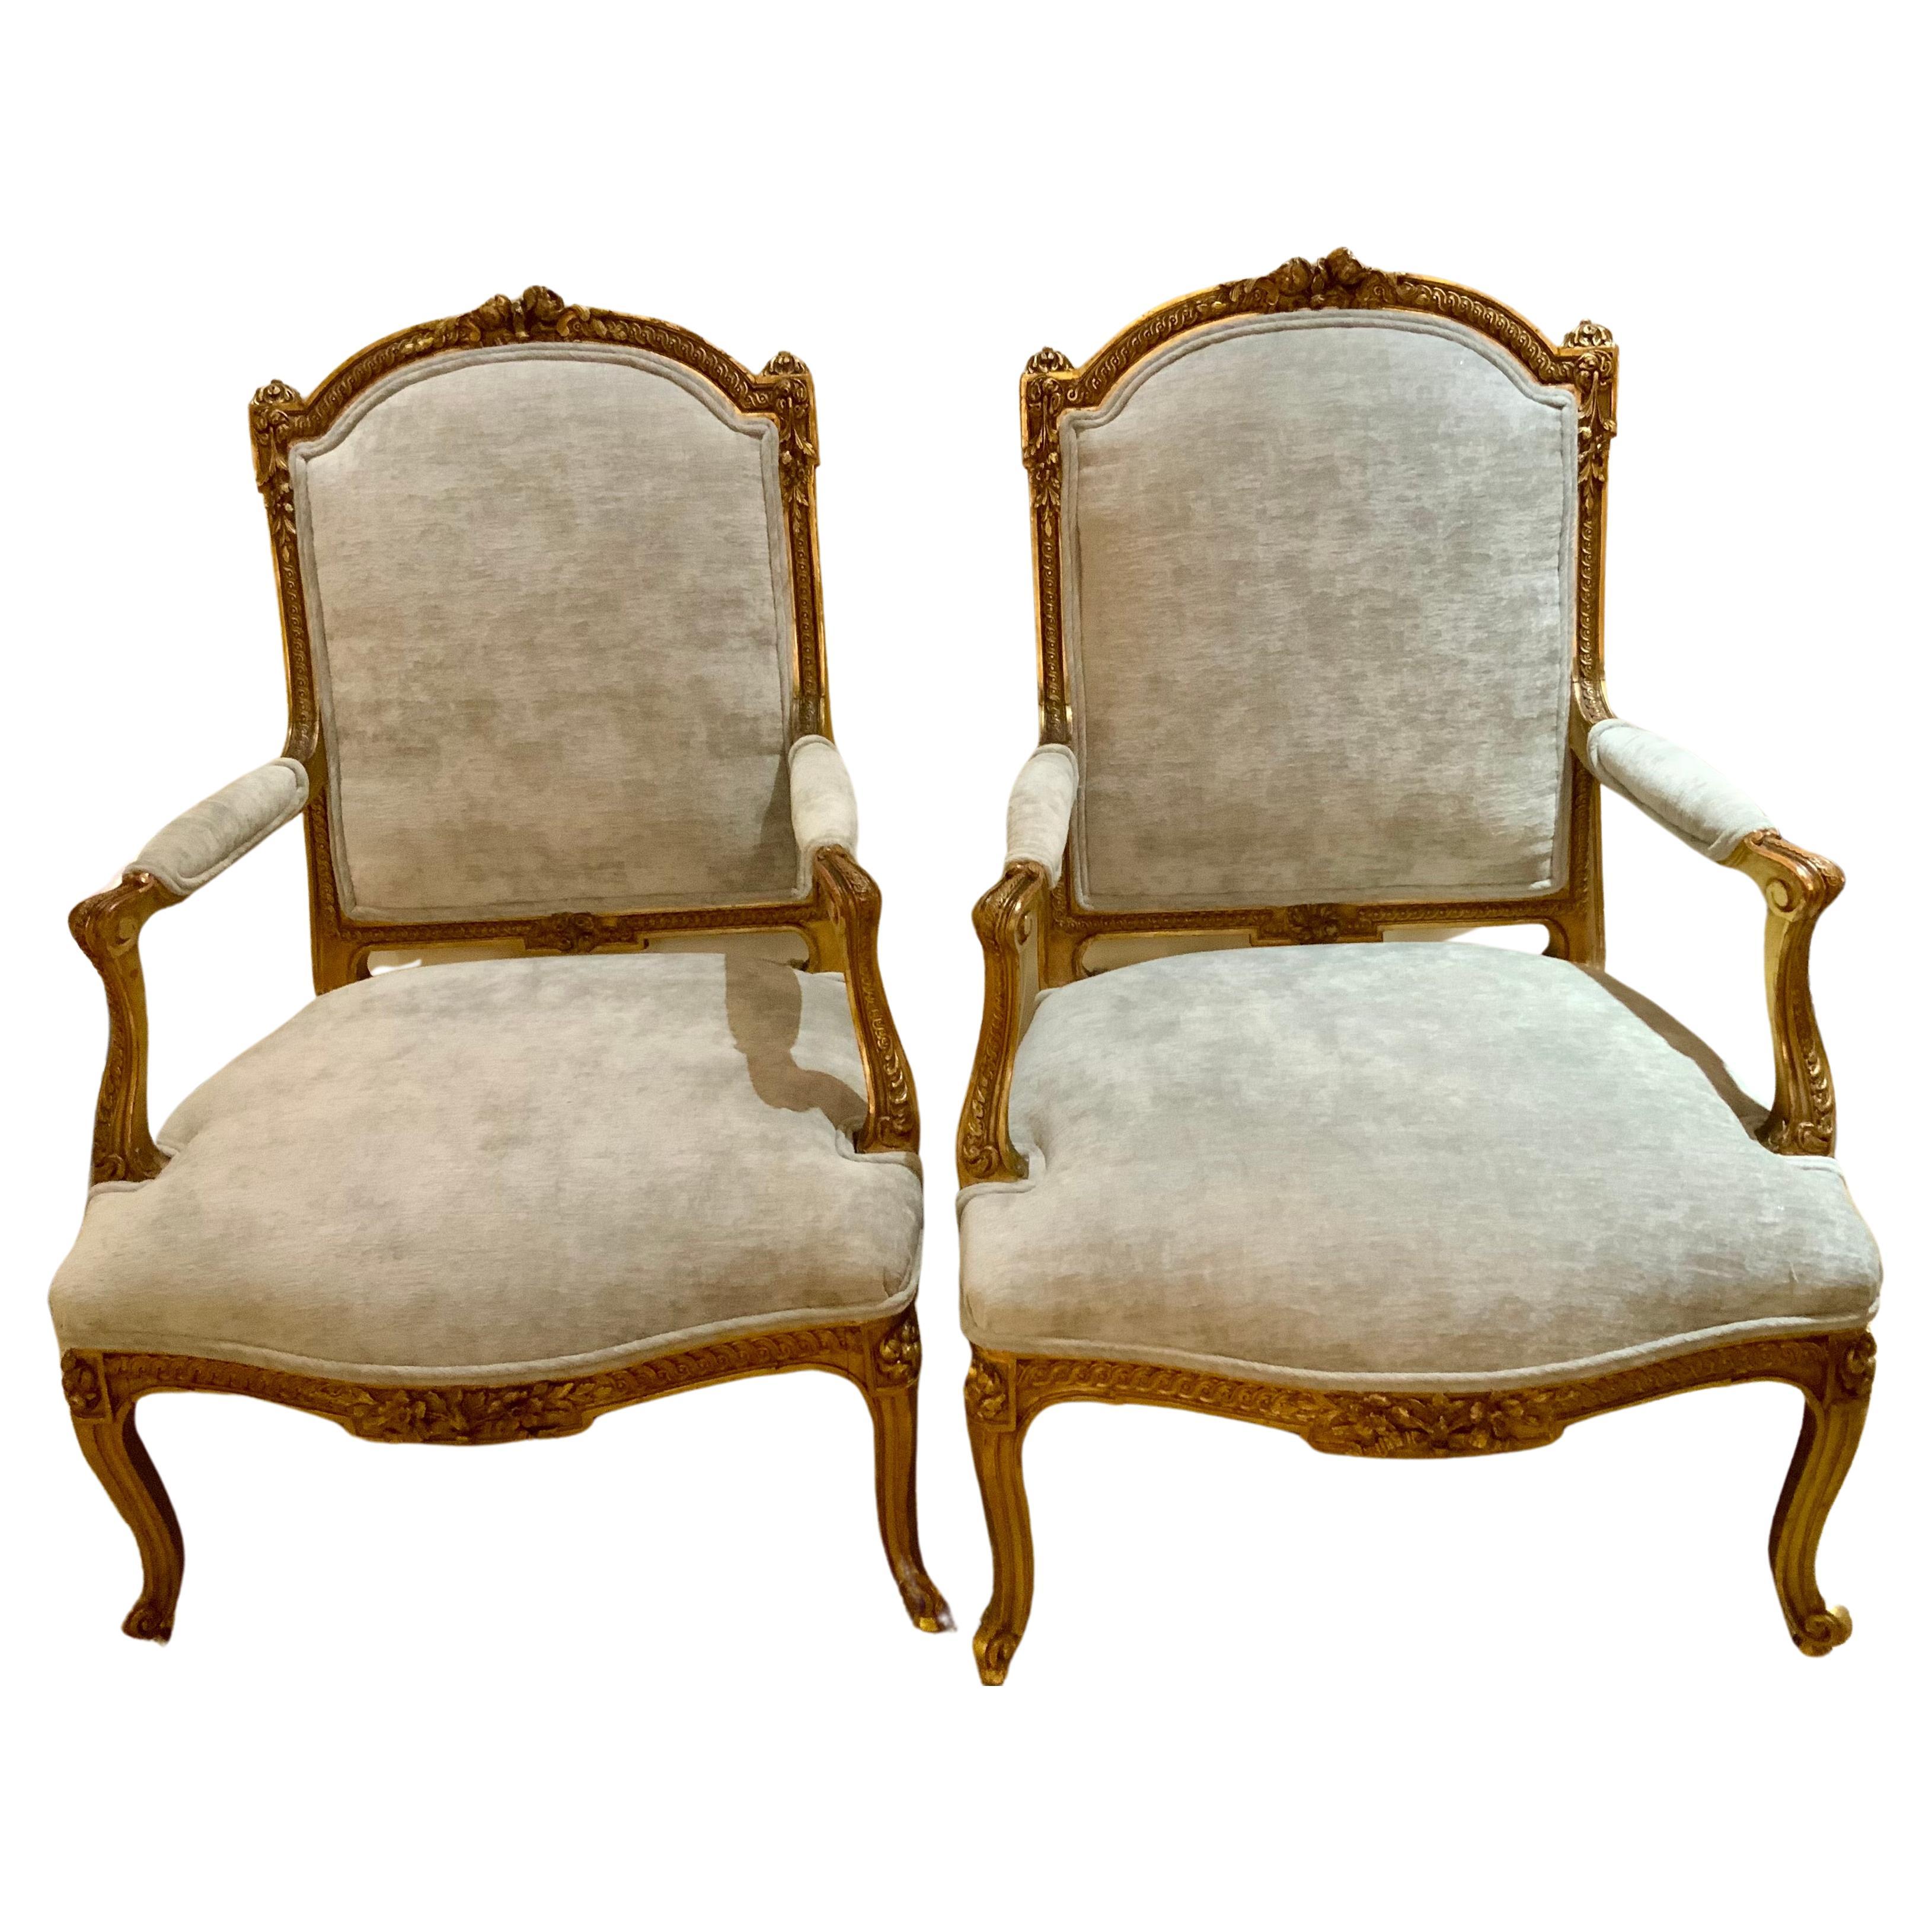 Pair of Louis XV-Style Giltwood Fauteuils/arm chairs